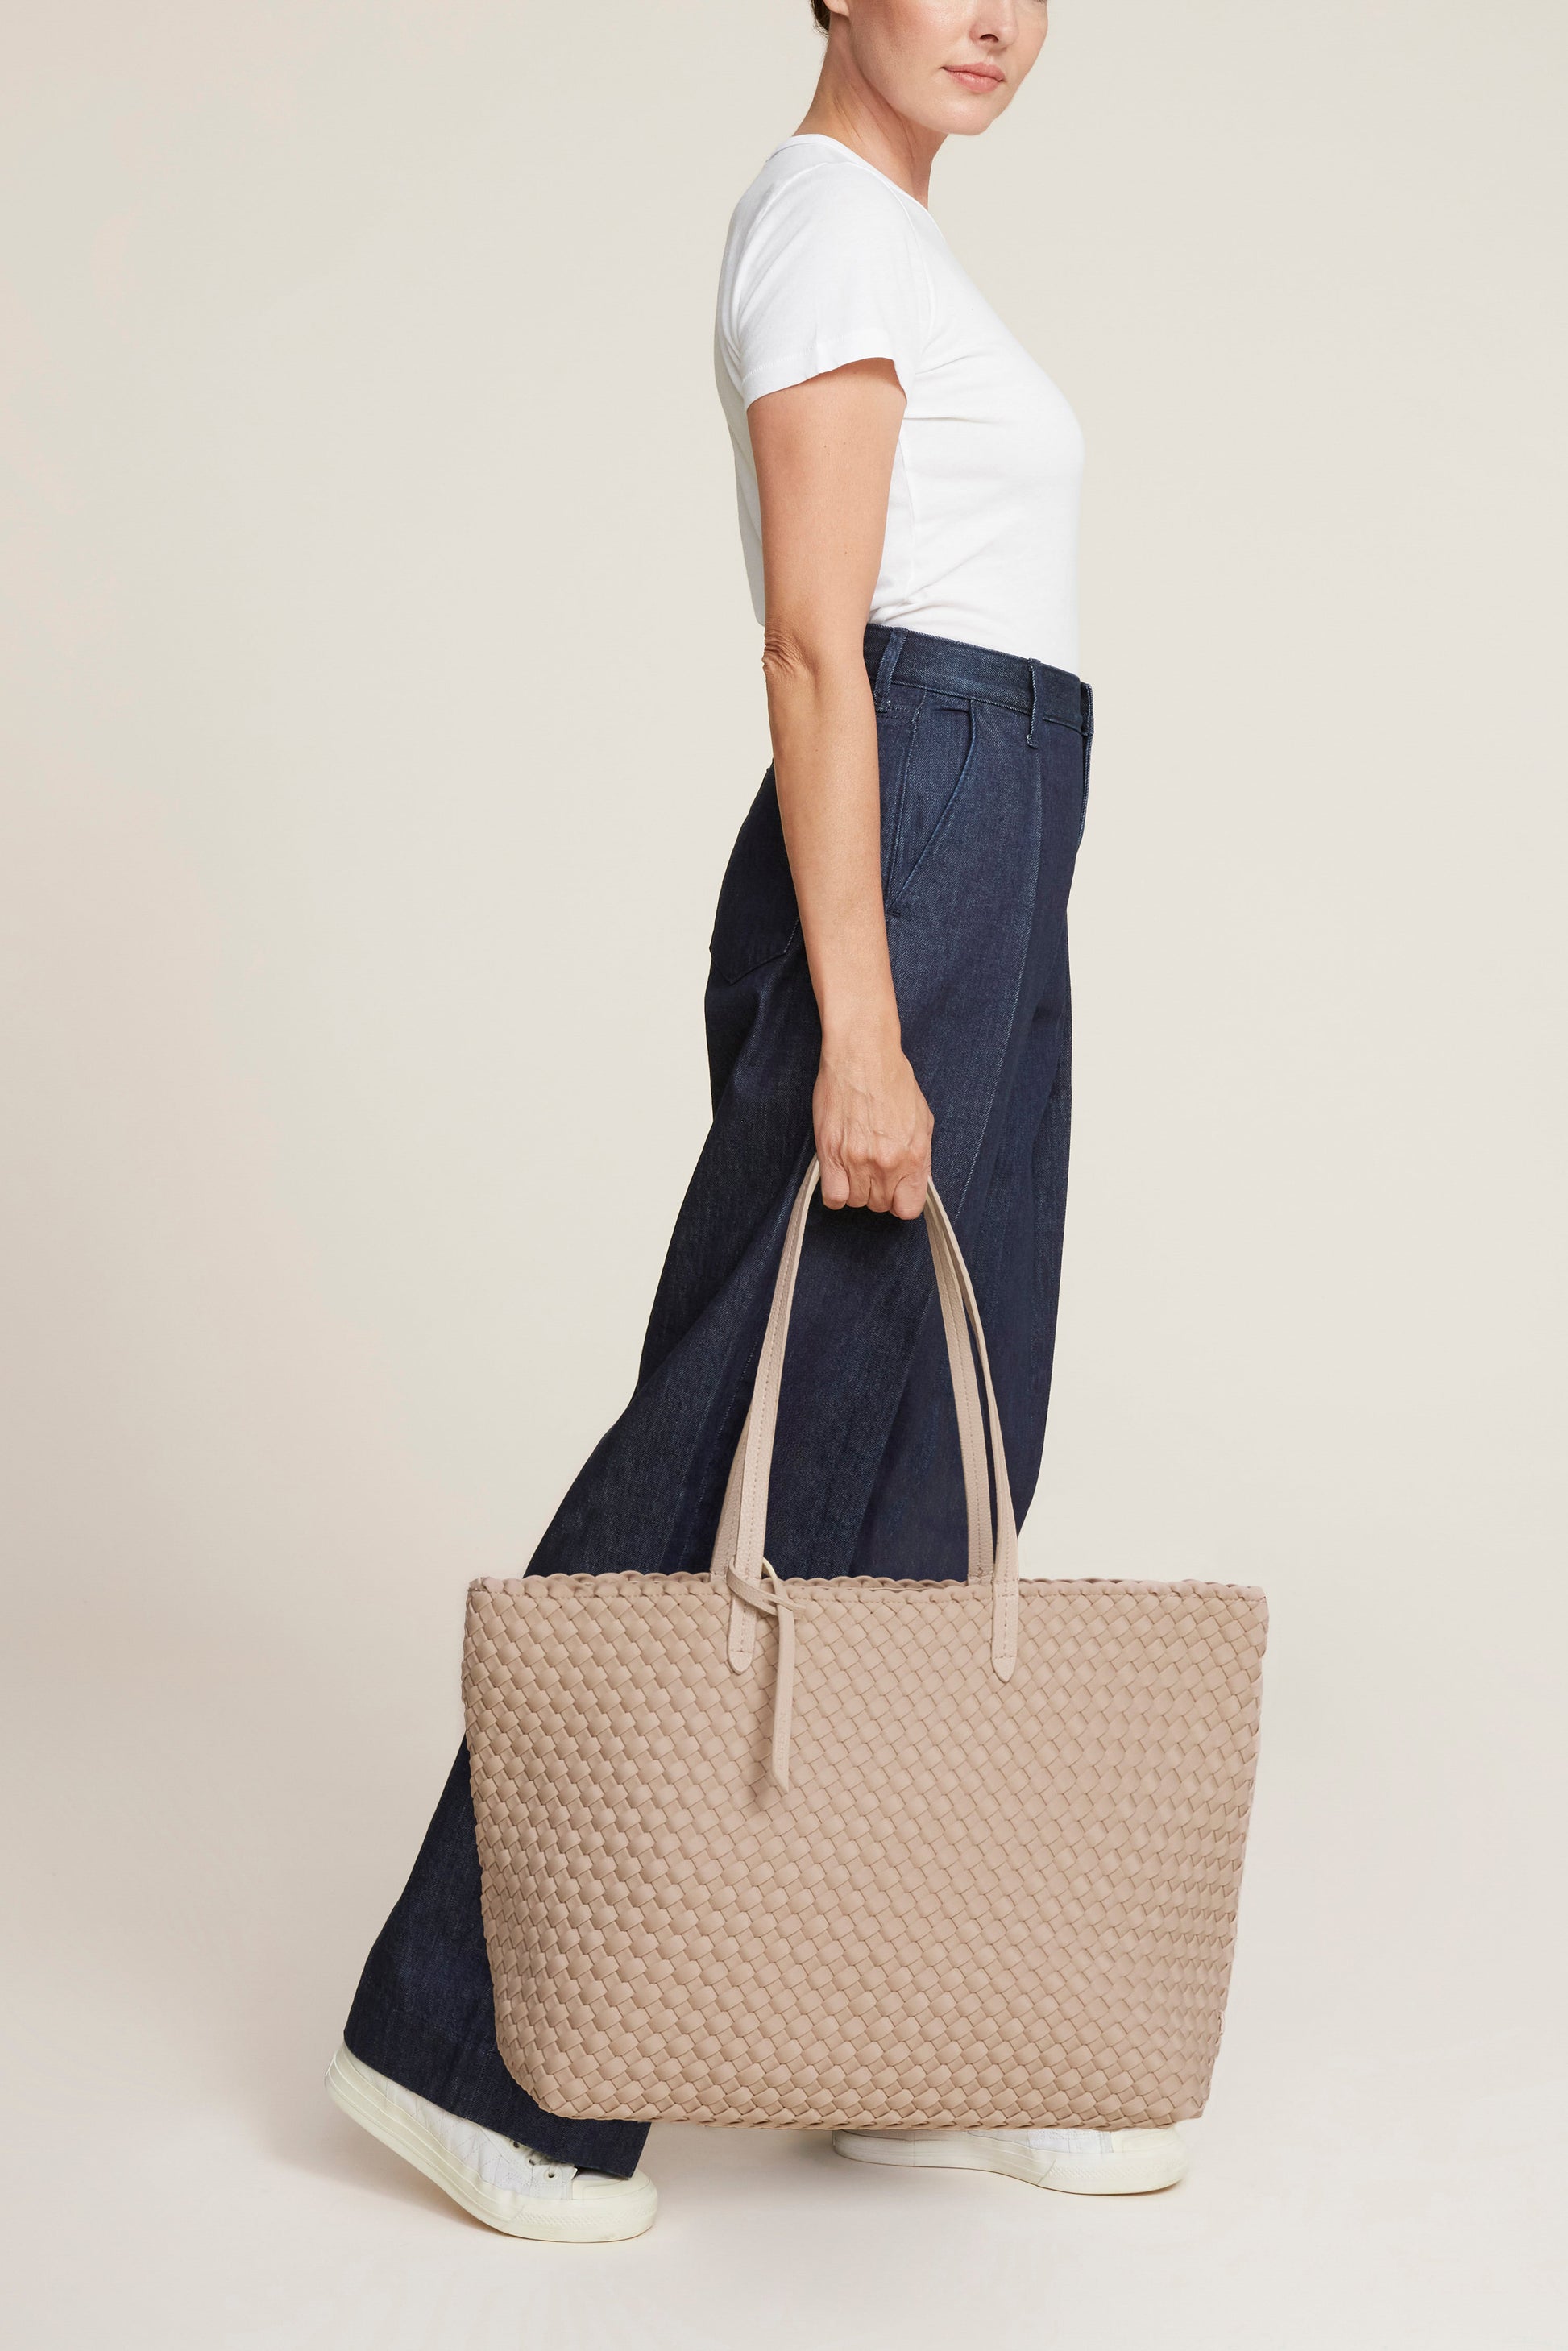 Tasche Jetsetter Large in CashmereNaghedi - Anita Hass